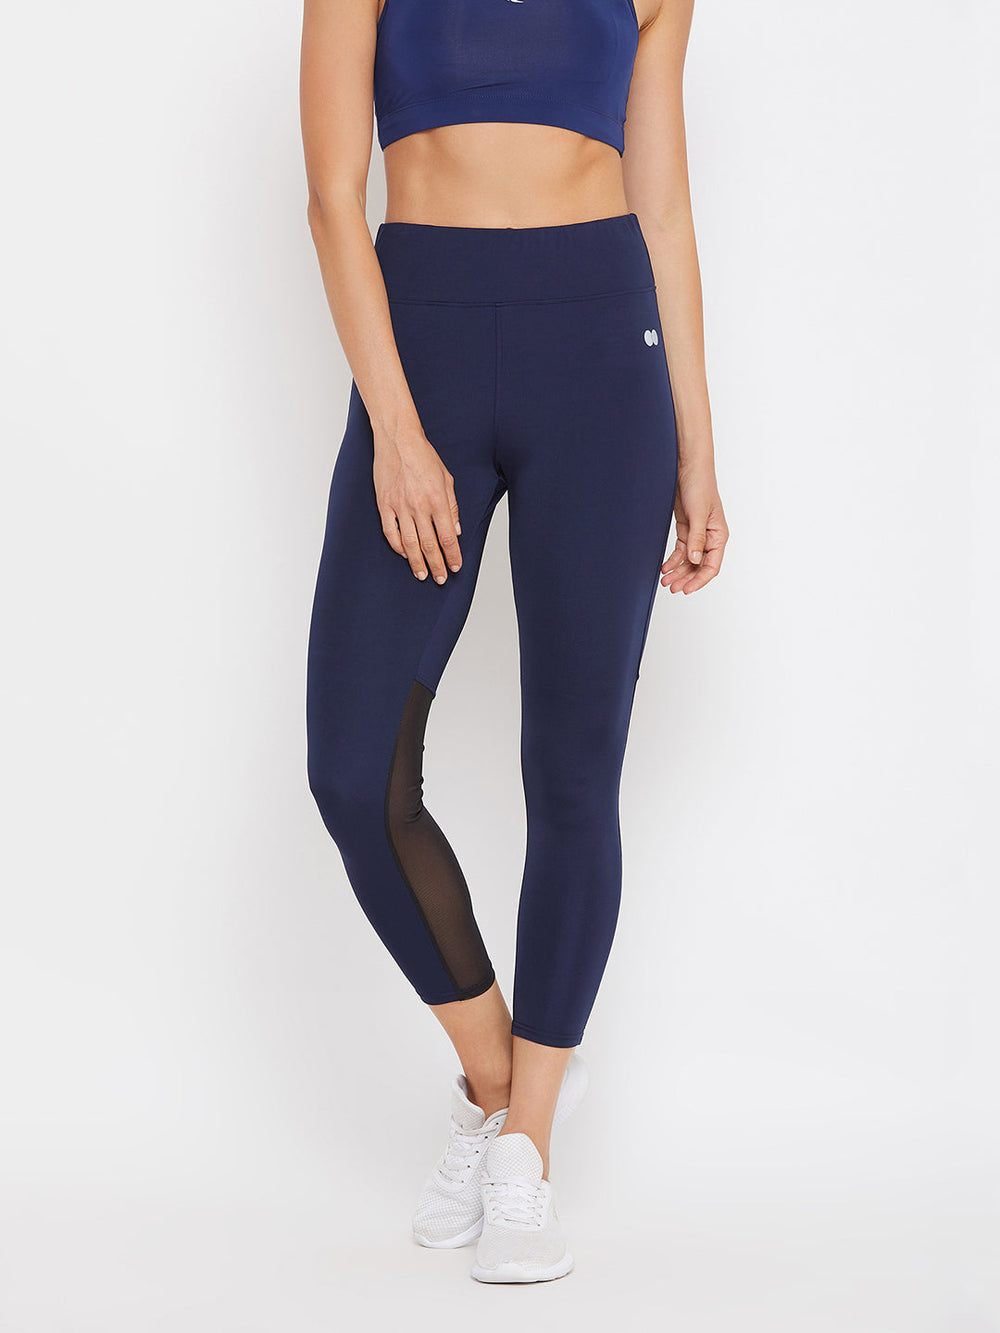 Activewear Ankle Length Tights In Navy